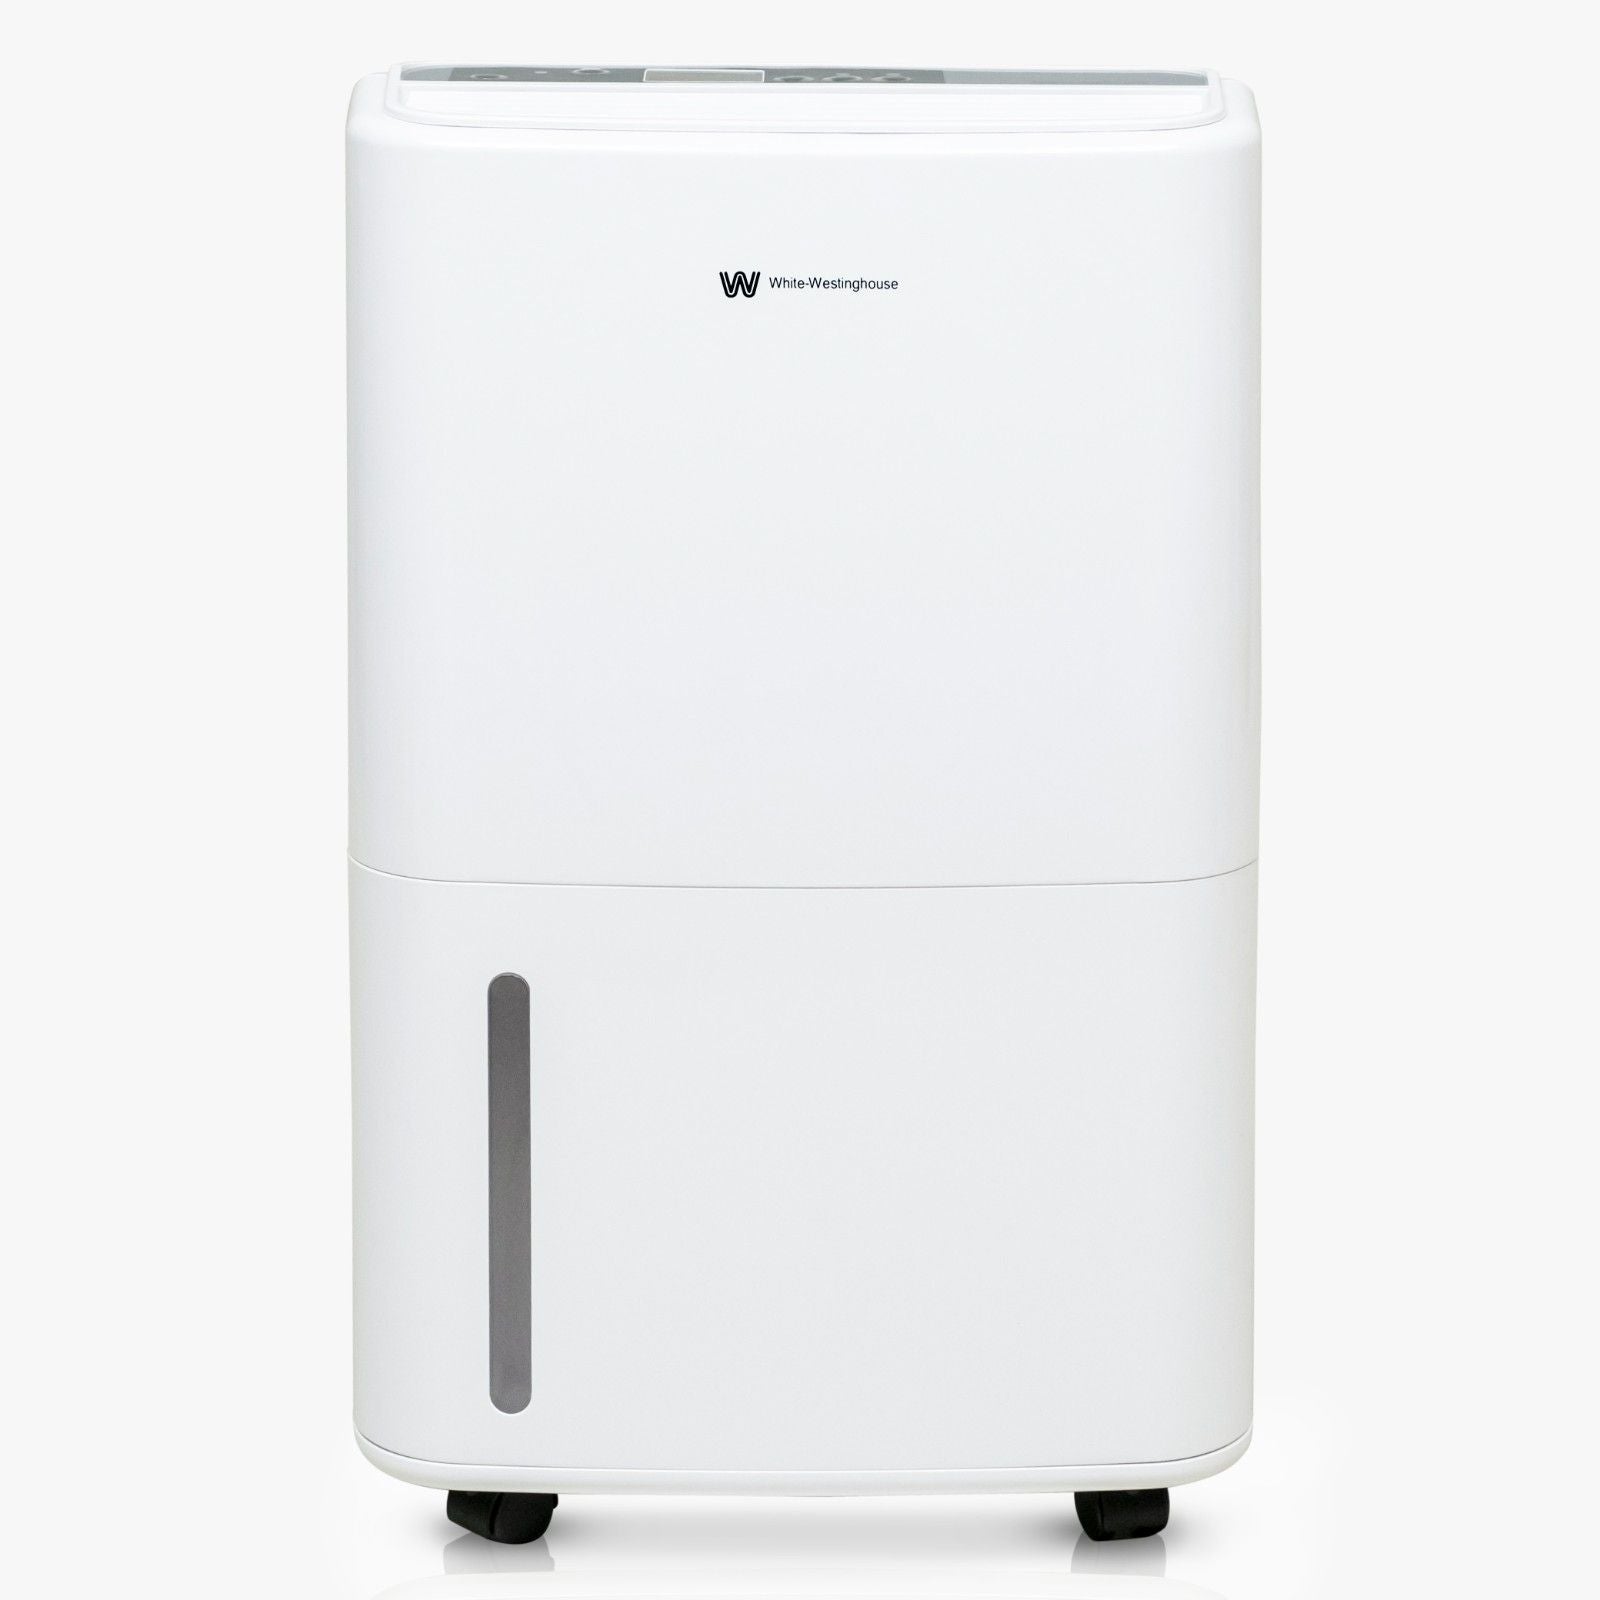 Front view of the White Westinghouse Dehumidifier AWHD20L, showcasing the sleek white design with a water level indicator on the front. The unit features a digital control panel on top and casters for easy mobility, making it ideal for maintaining optimal humidity levels in residential and commercial spaces.